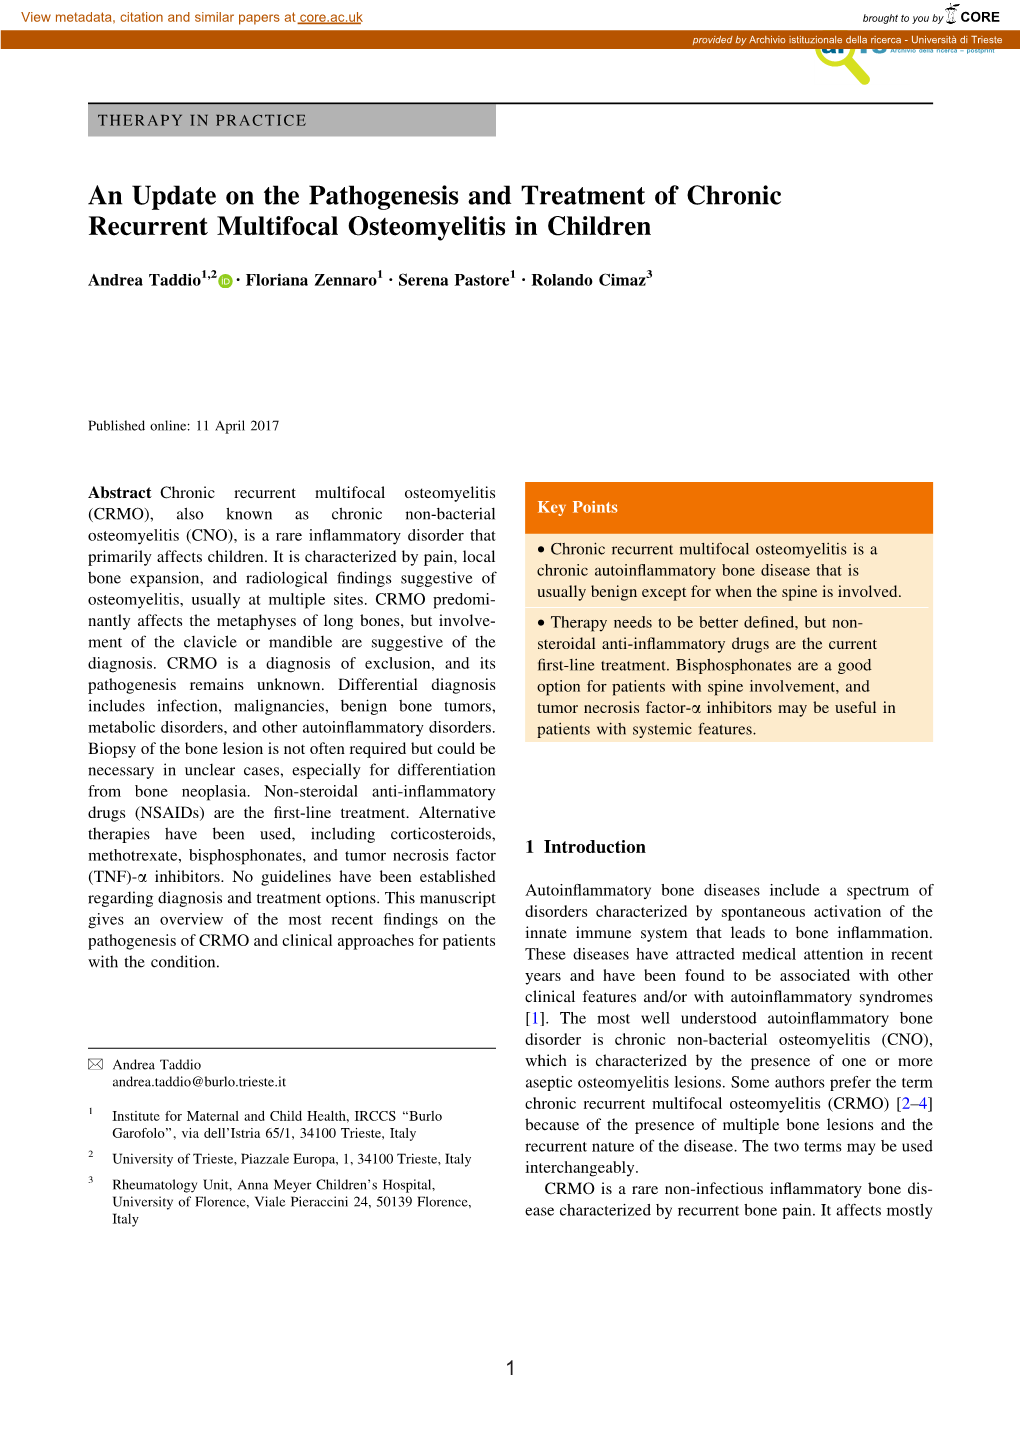 An Update on the Pathogenesis and Treatment of Chronic Recurrent Multifocal Osteomyelitis in Children